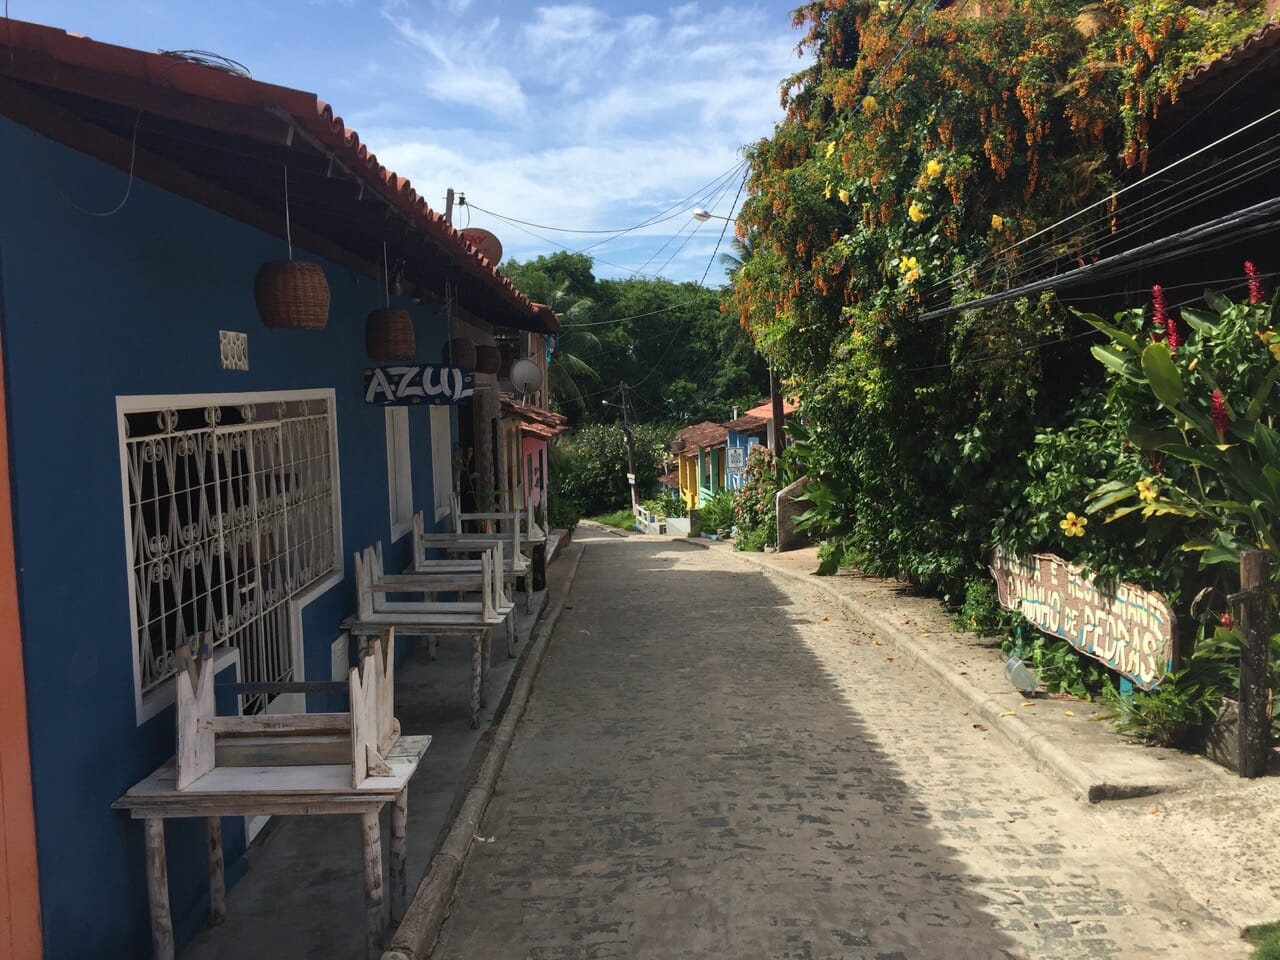 A street in the village of Velha Boipeba wth a house painted in blue with white windows on one side and trees on the other side, Boipeba, Brazil